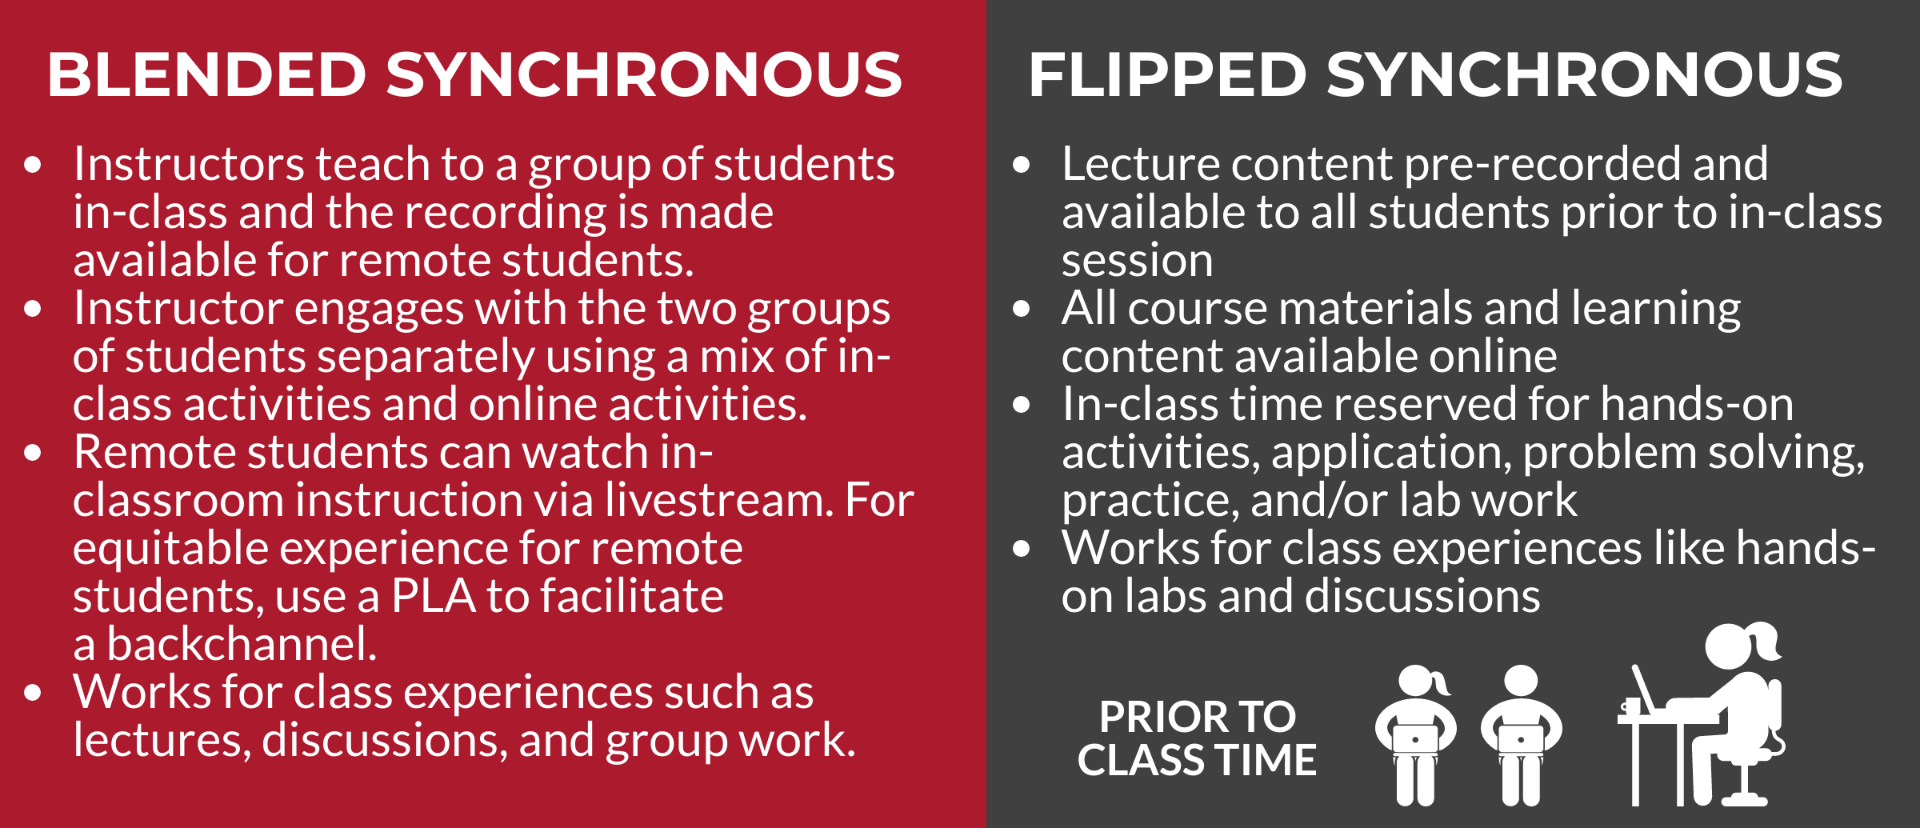 descriptions of blended and flipped synchronous teaching styles